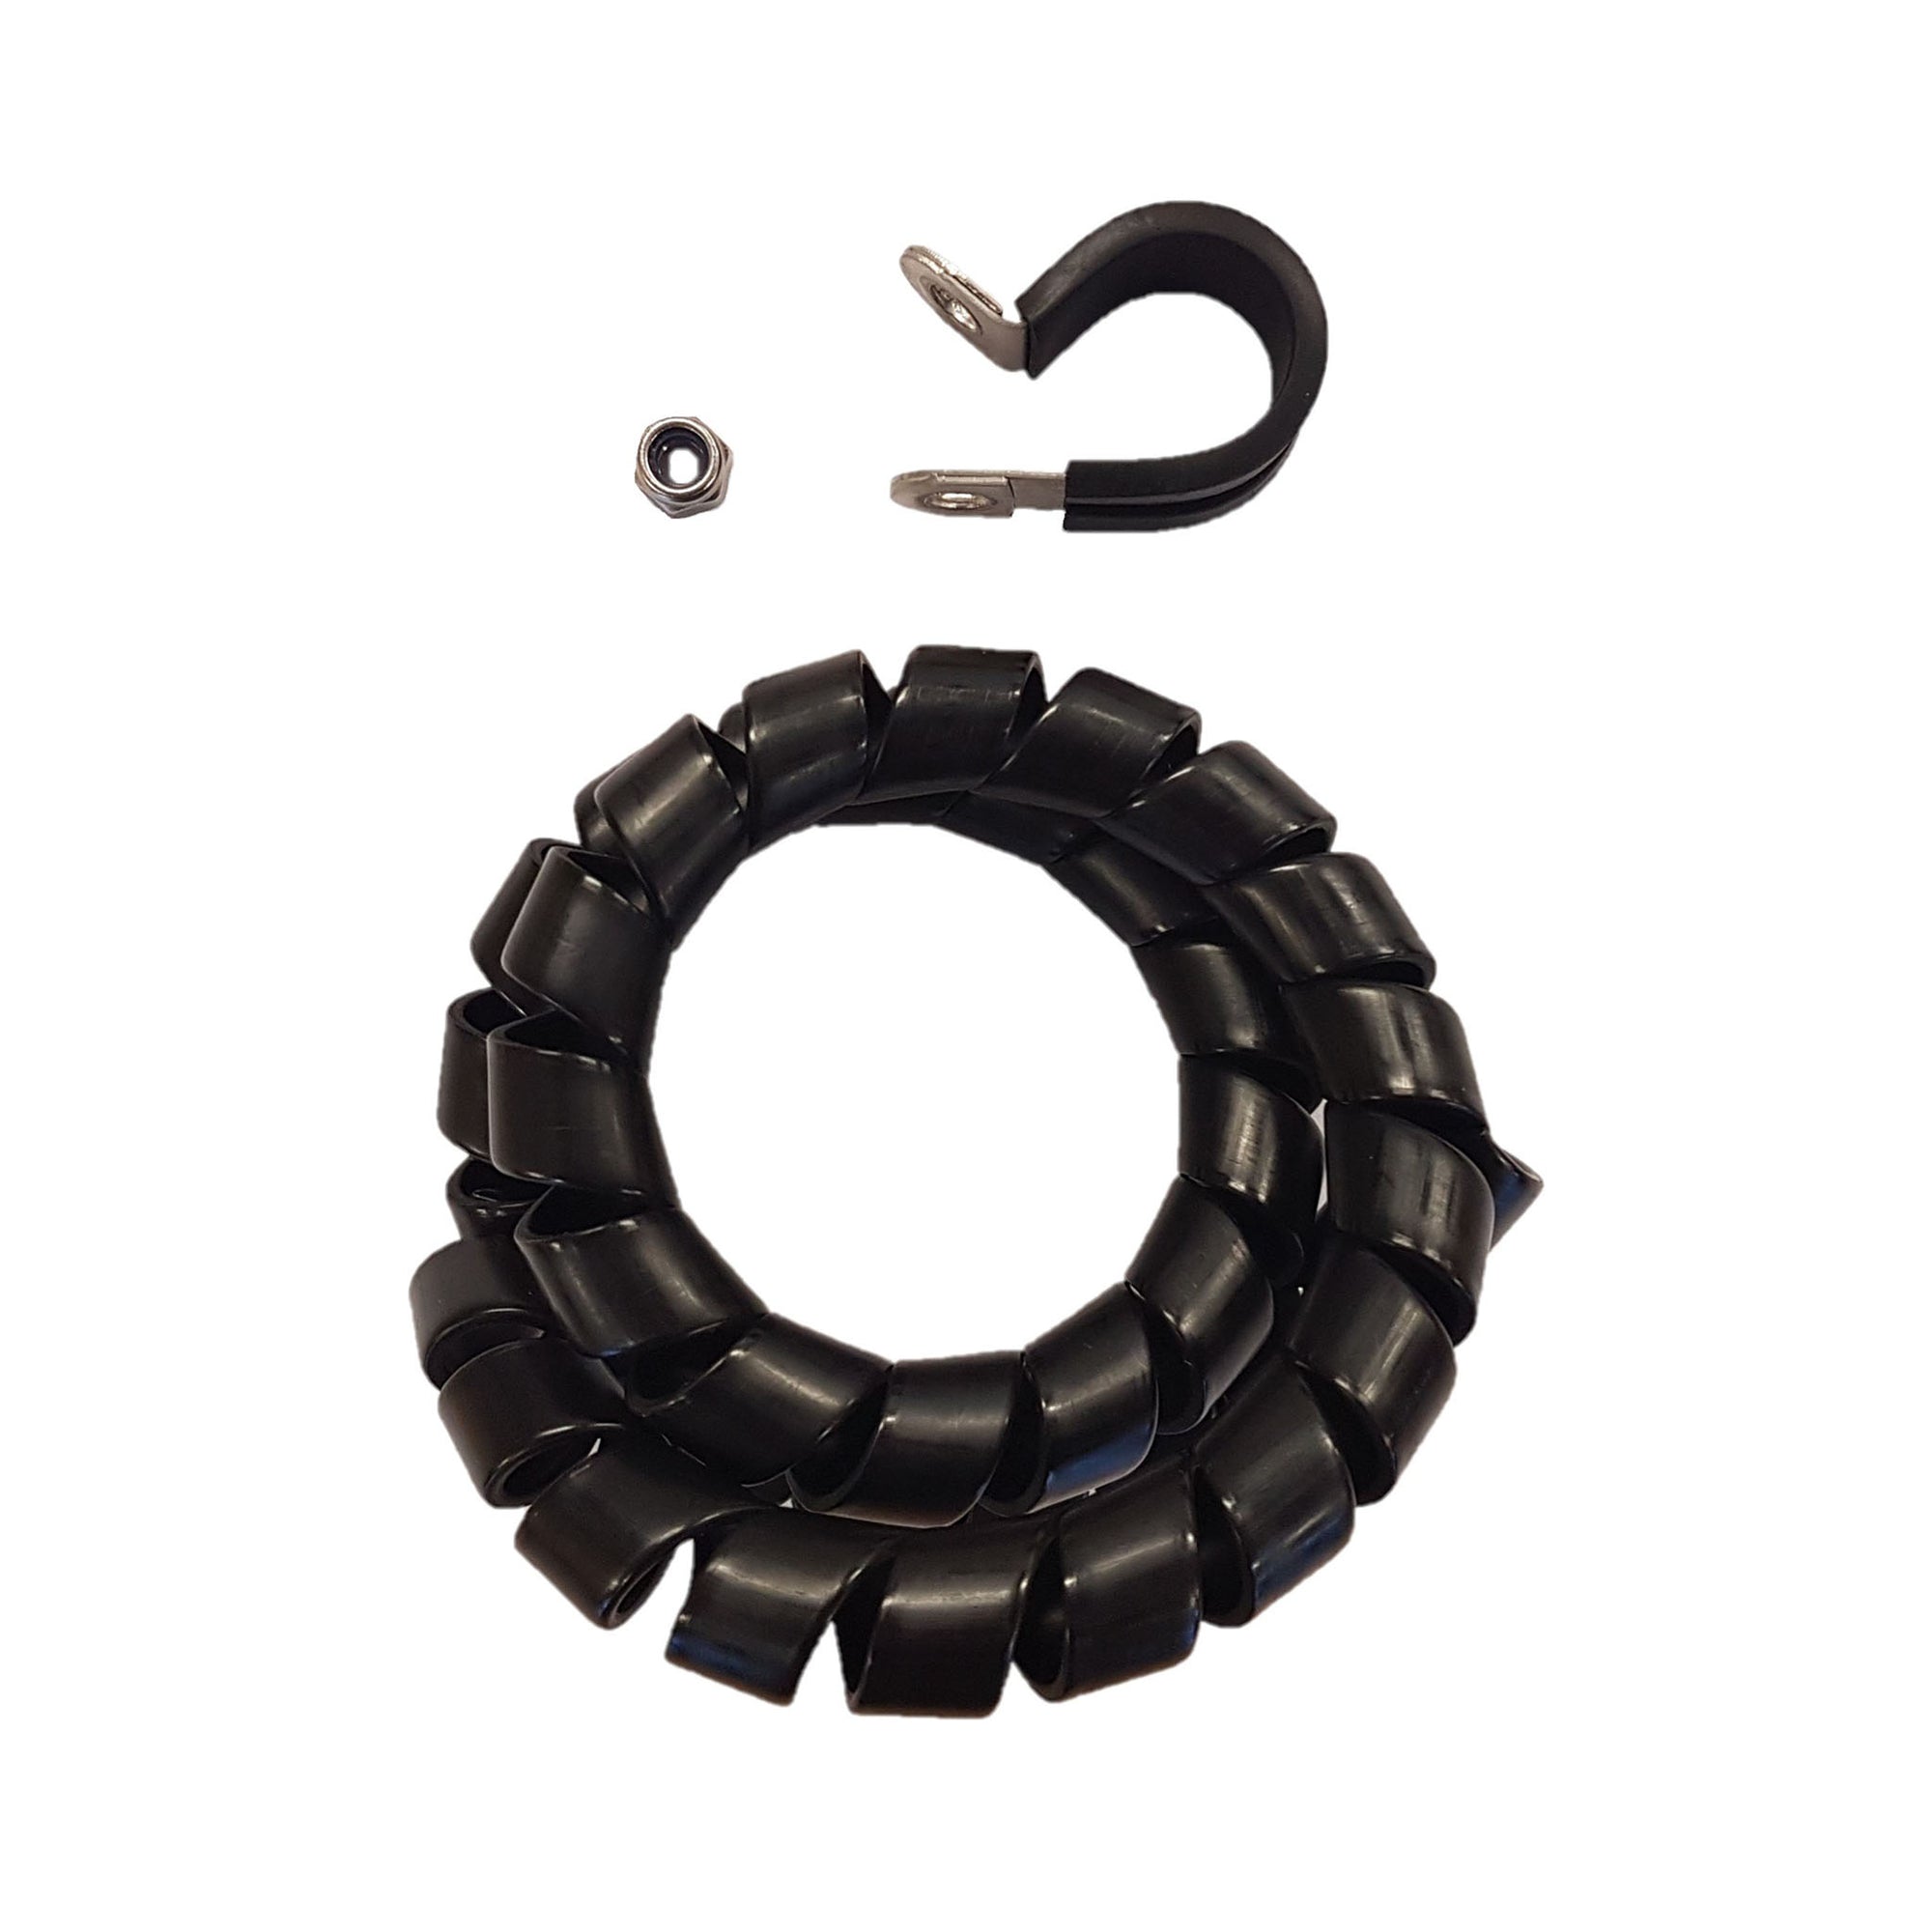 Hose Protection Kit for 3/16"